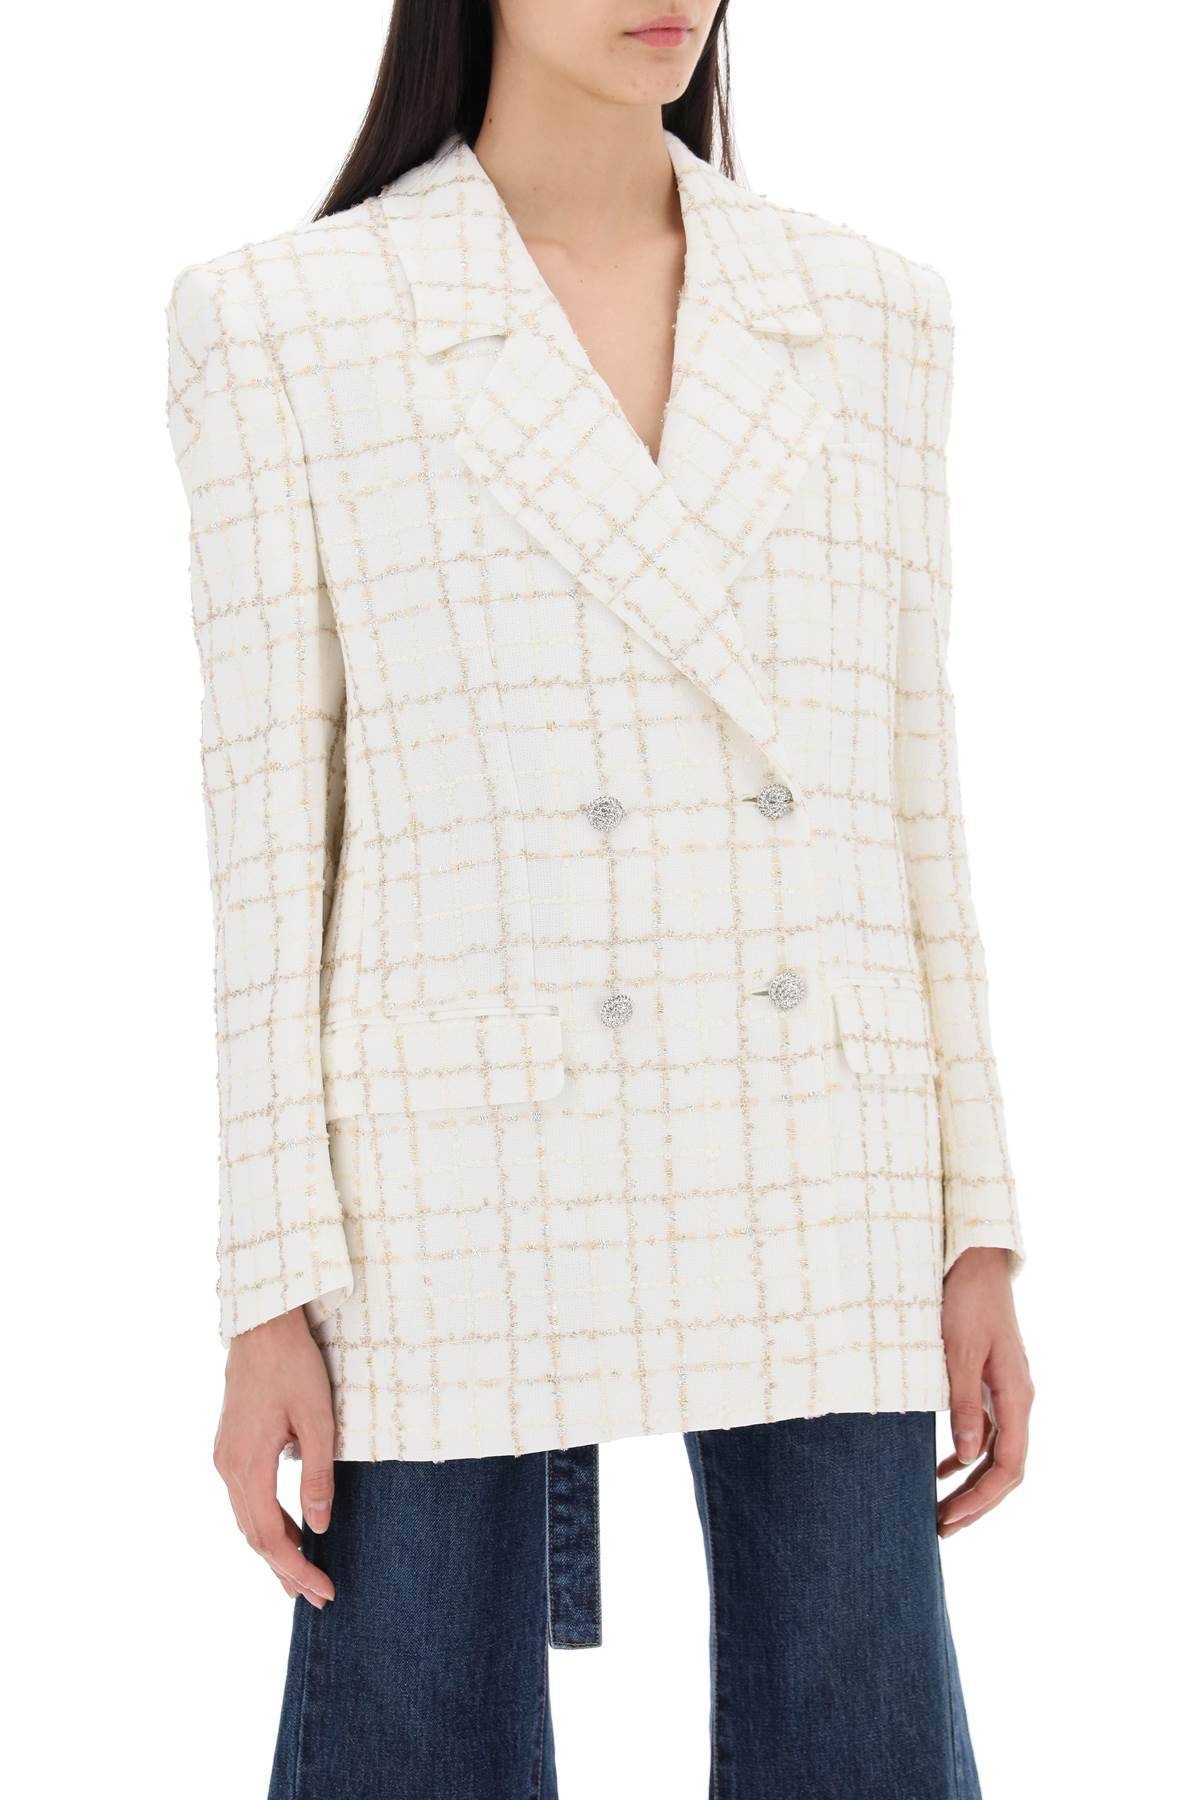 Alessandra Rich Oversized Tweed Jacket With Plaid Pattern - 3